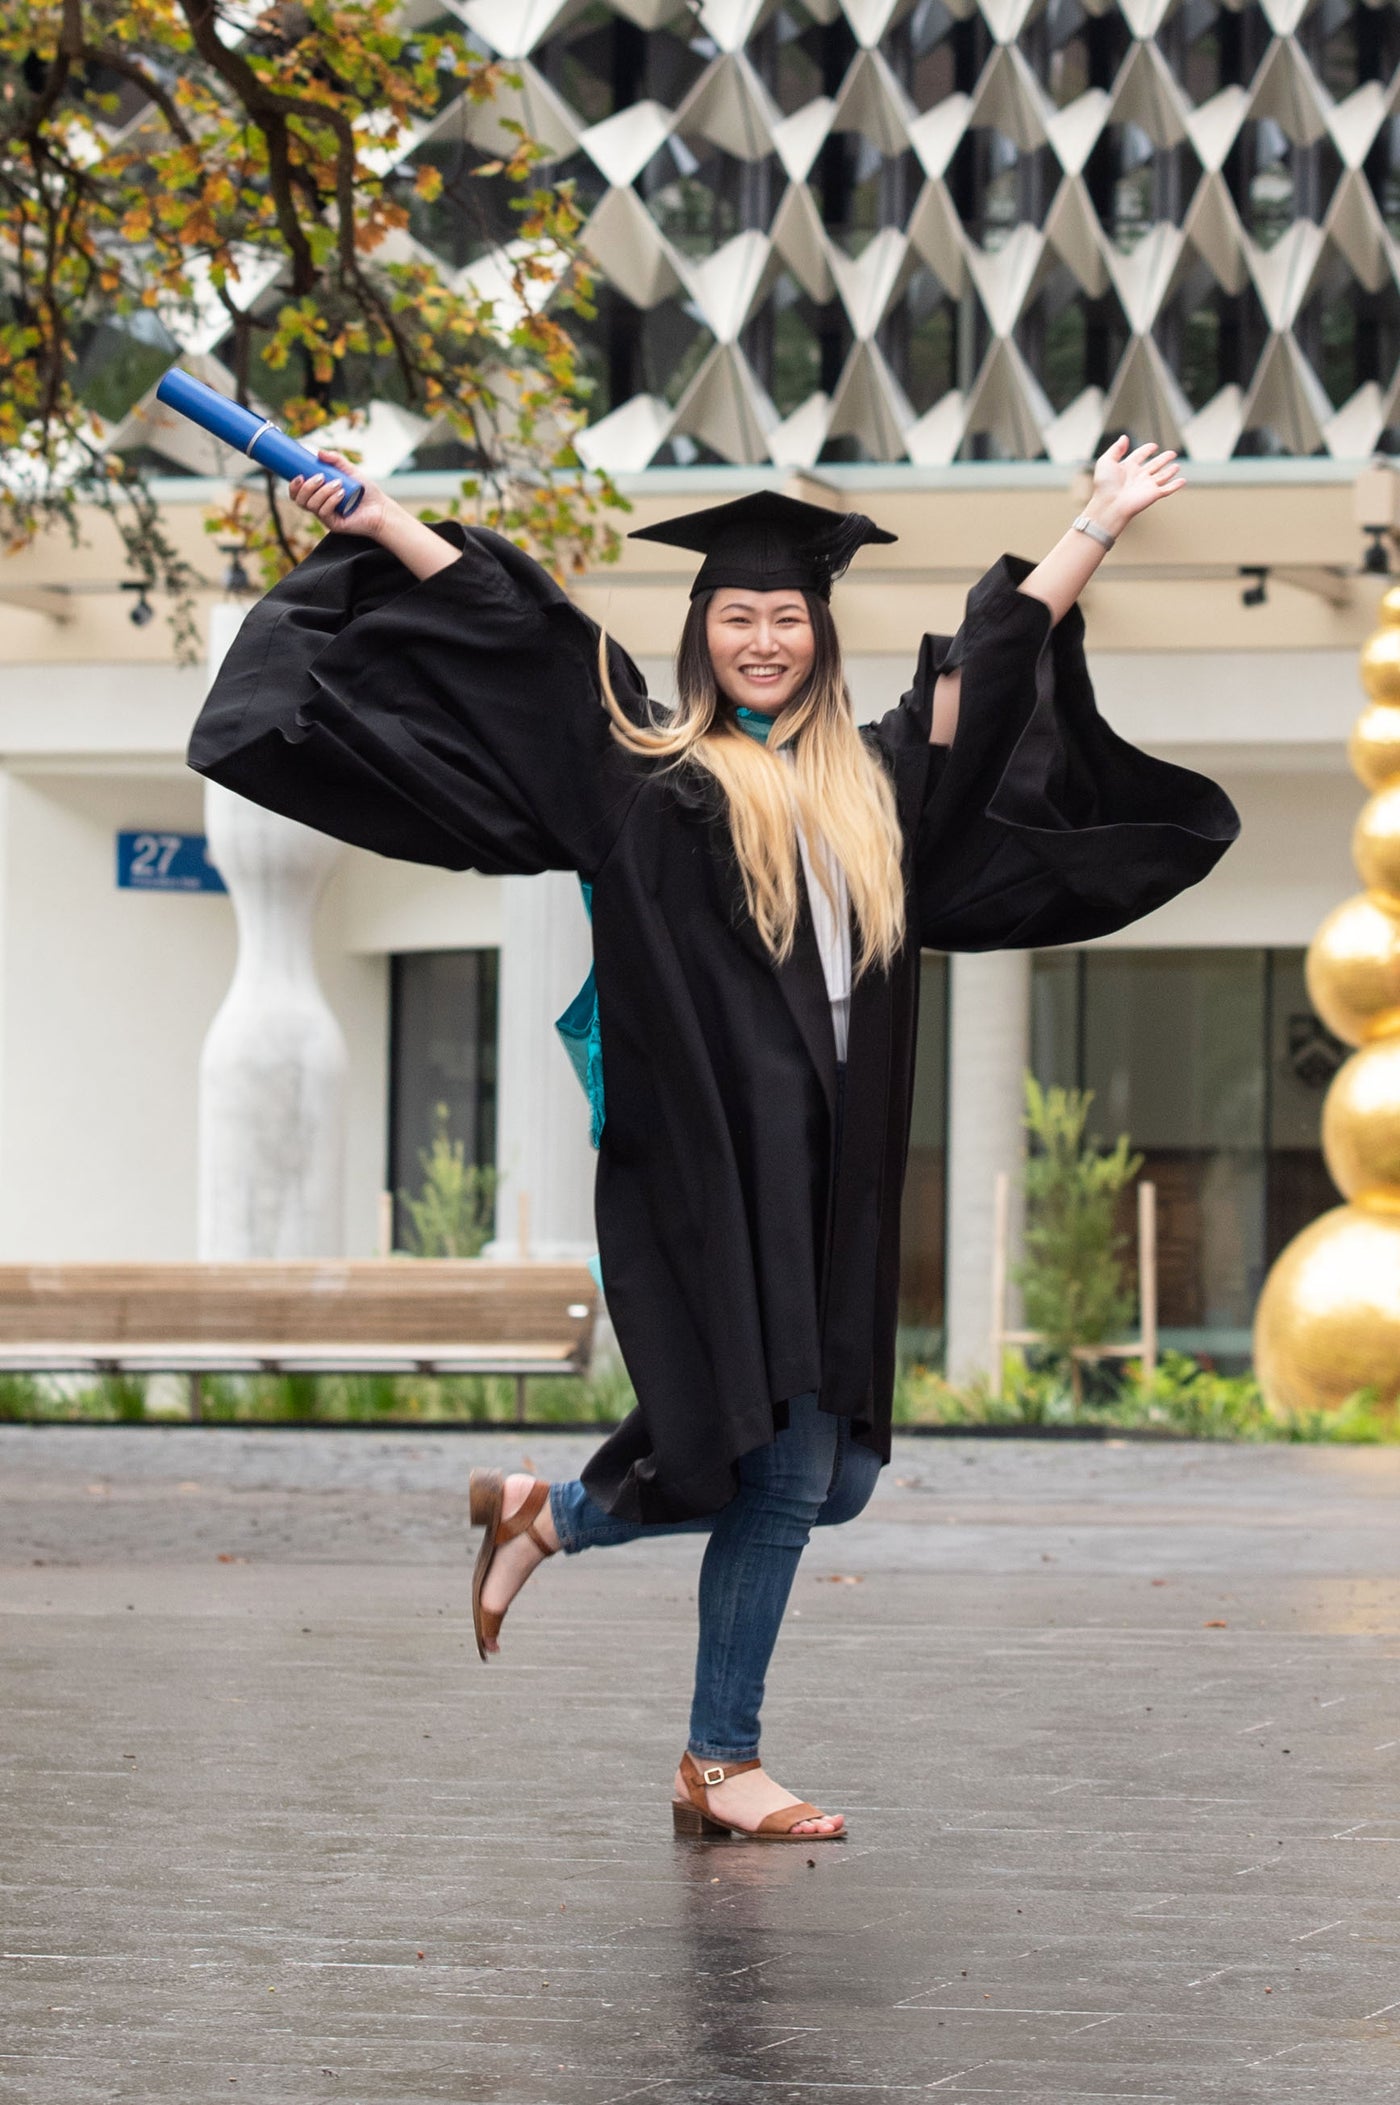 Graduation Gown Pictures  Download Free Images on Unsplash